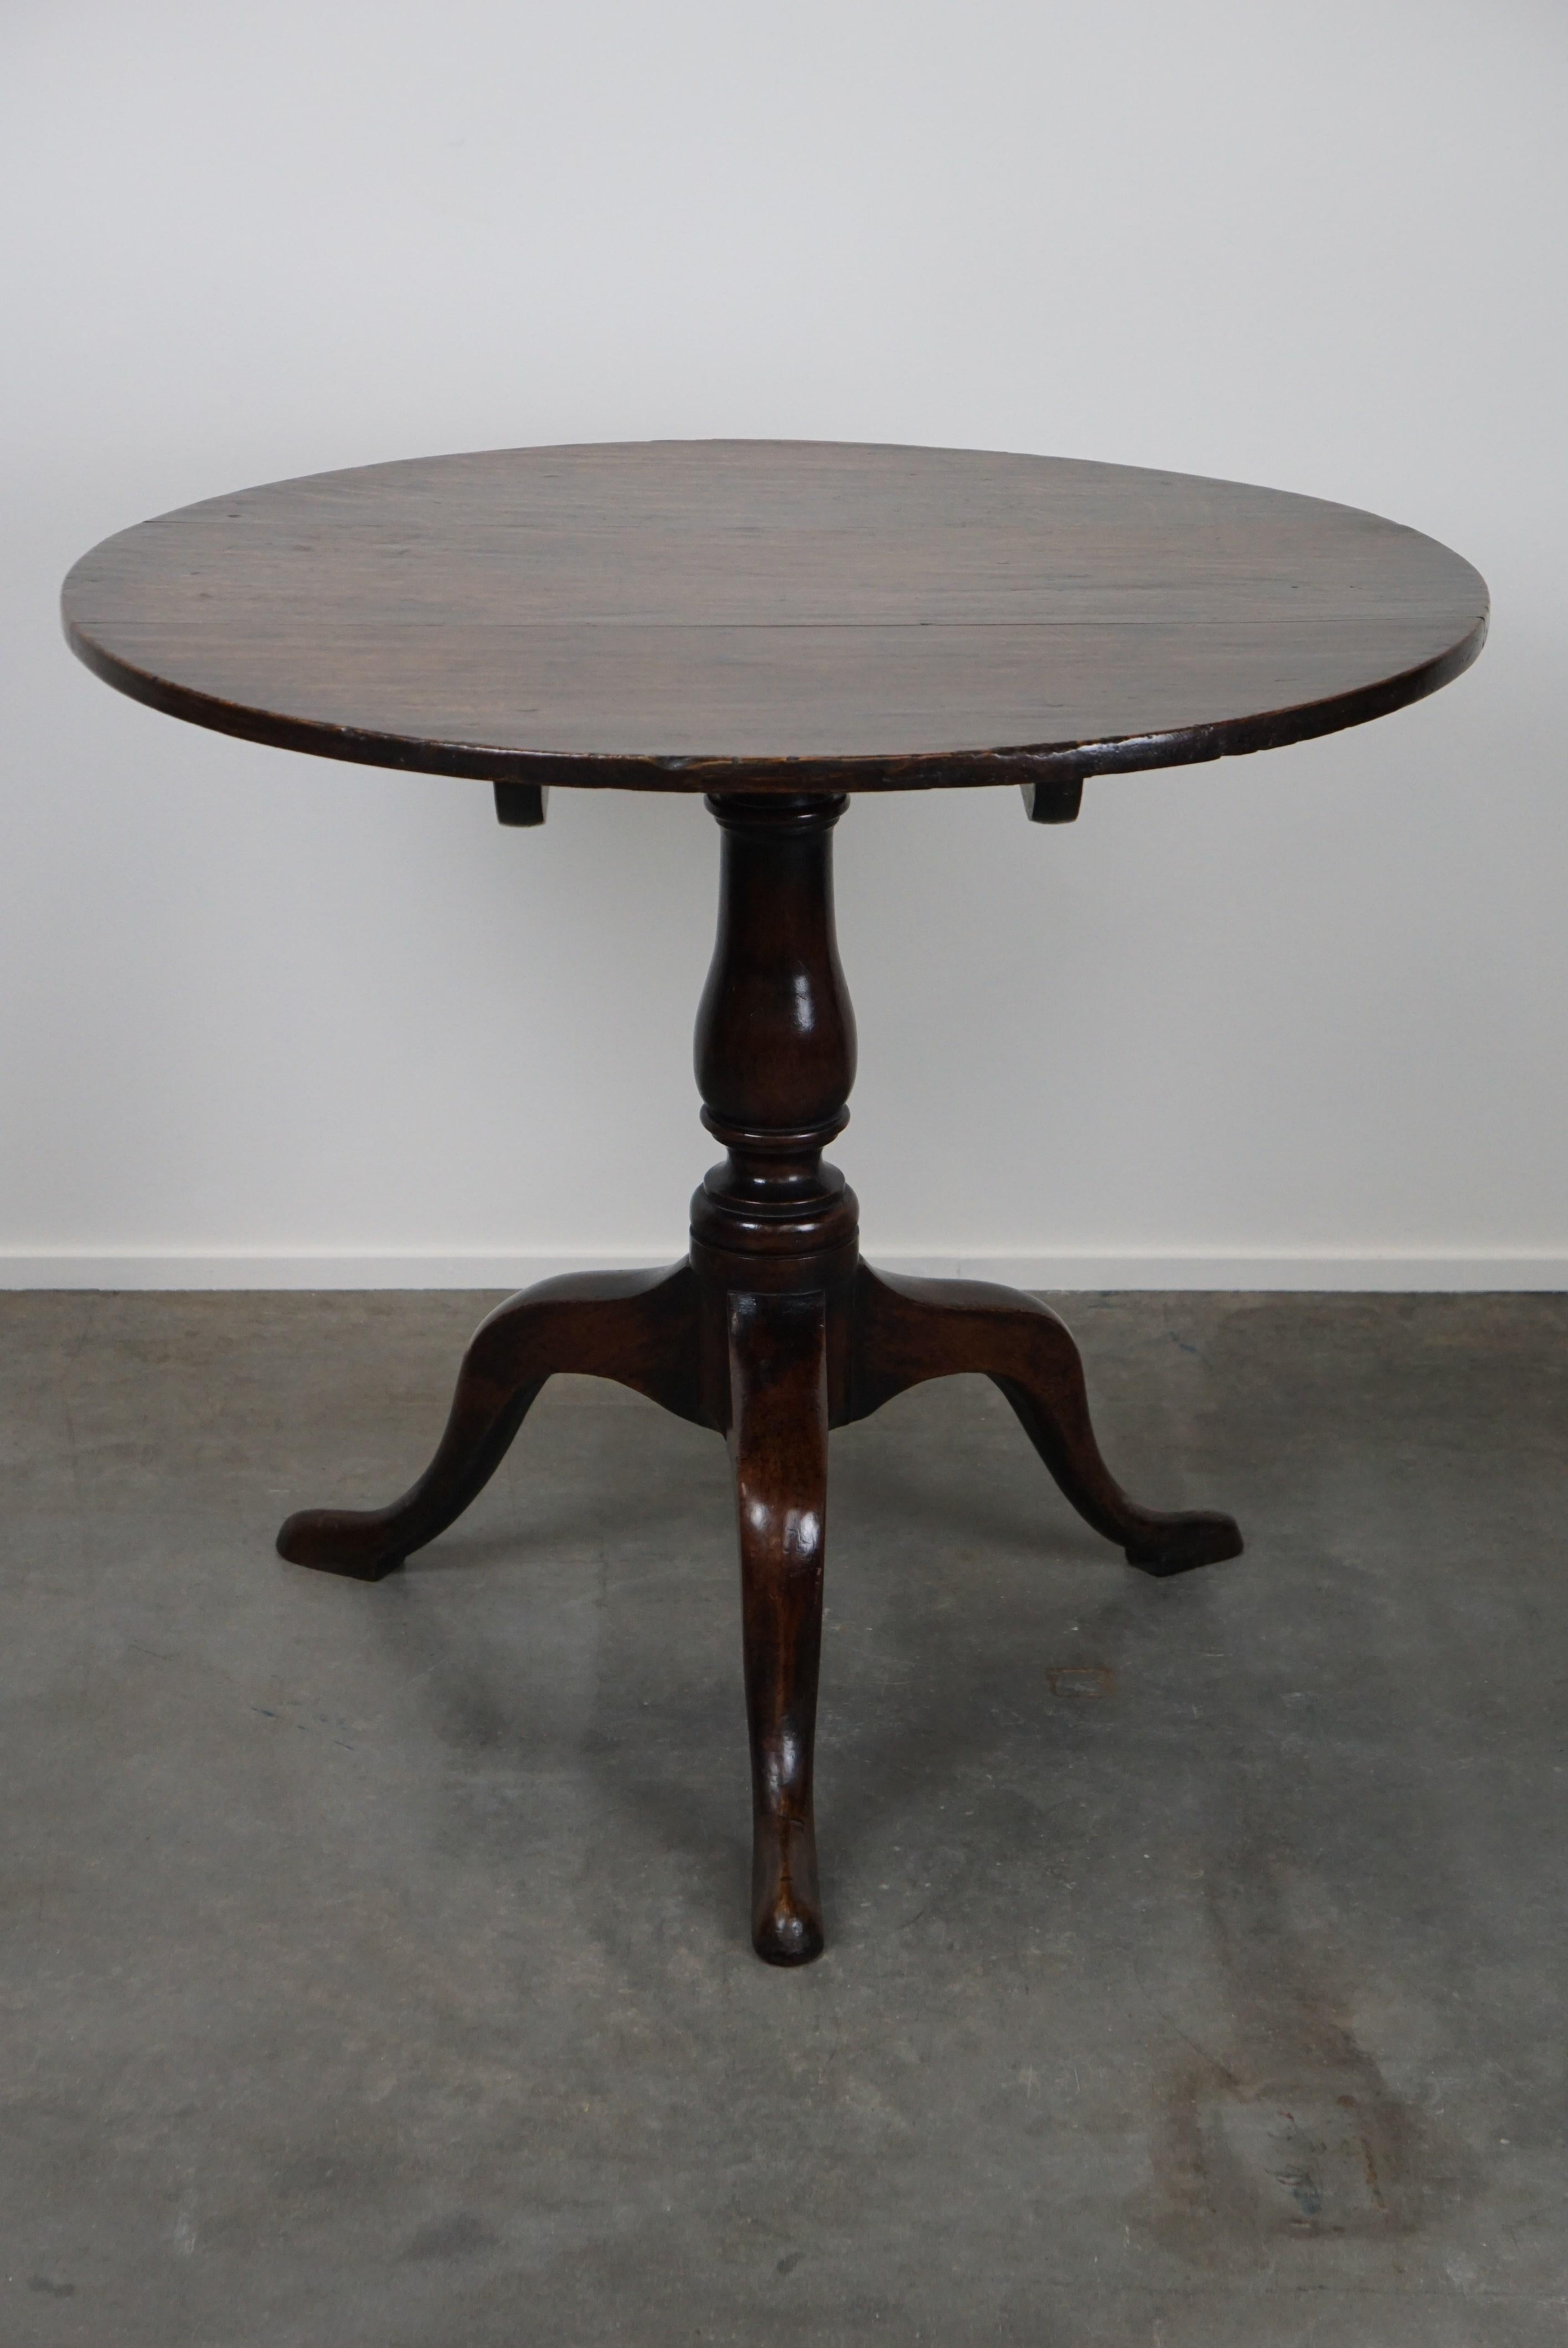 Offered is this beautiful round antique English oak tilt-top table with wonderful colors. This lovely mid-19th century English oak tilt-top table is in a very good condition and will look great in both a modern and a classic interior.

Please